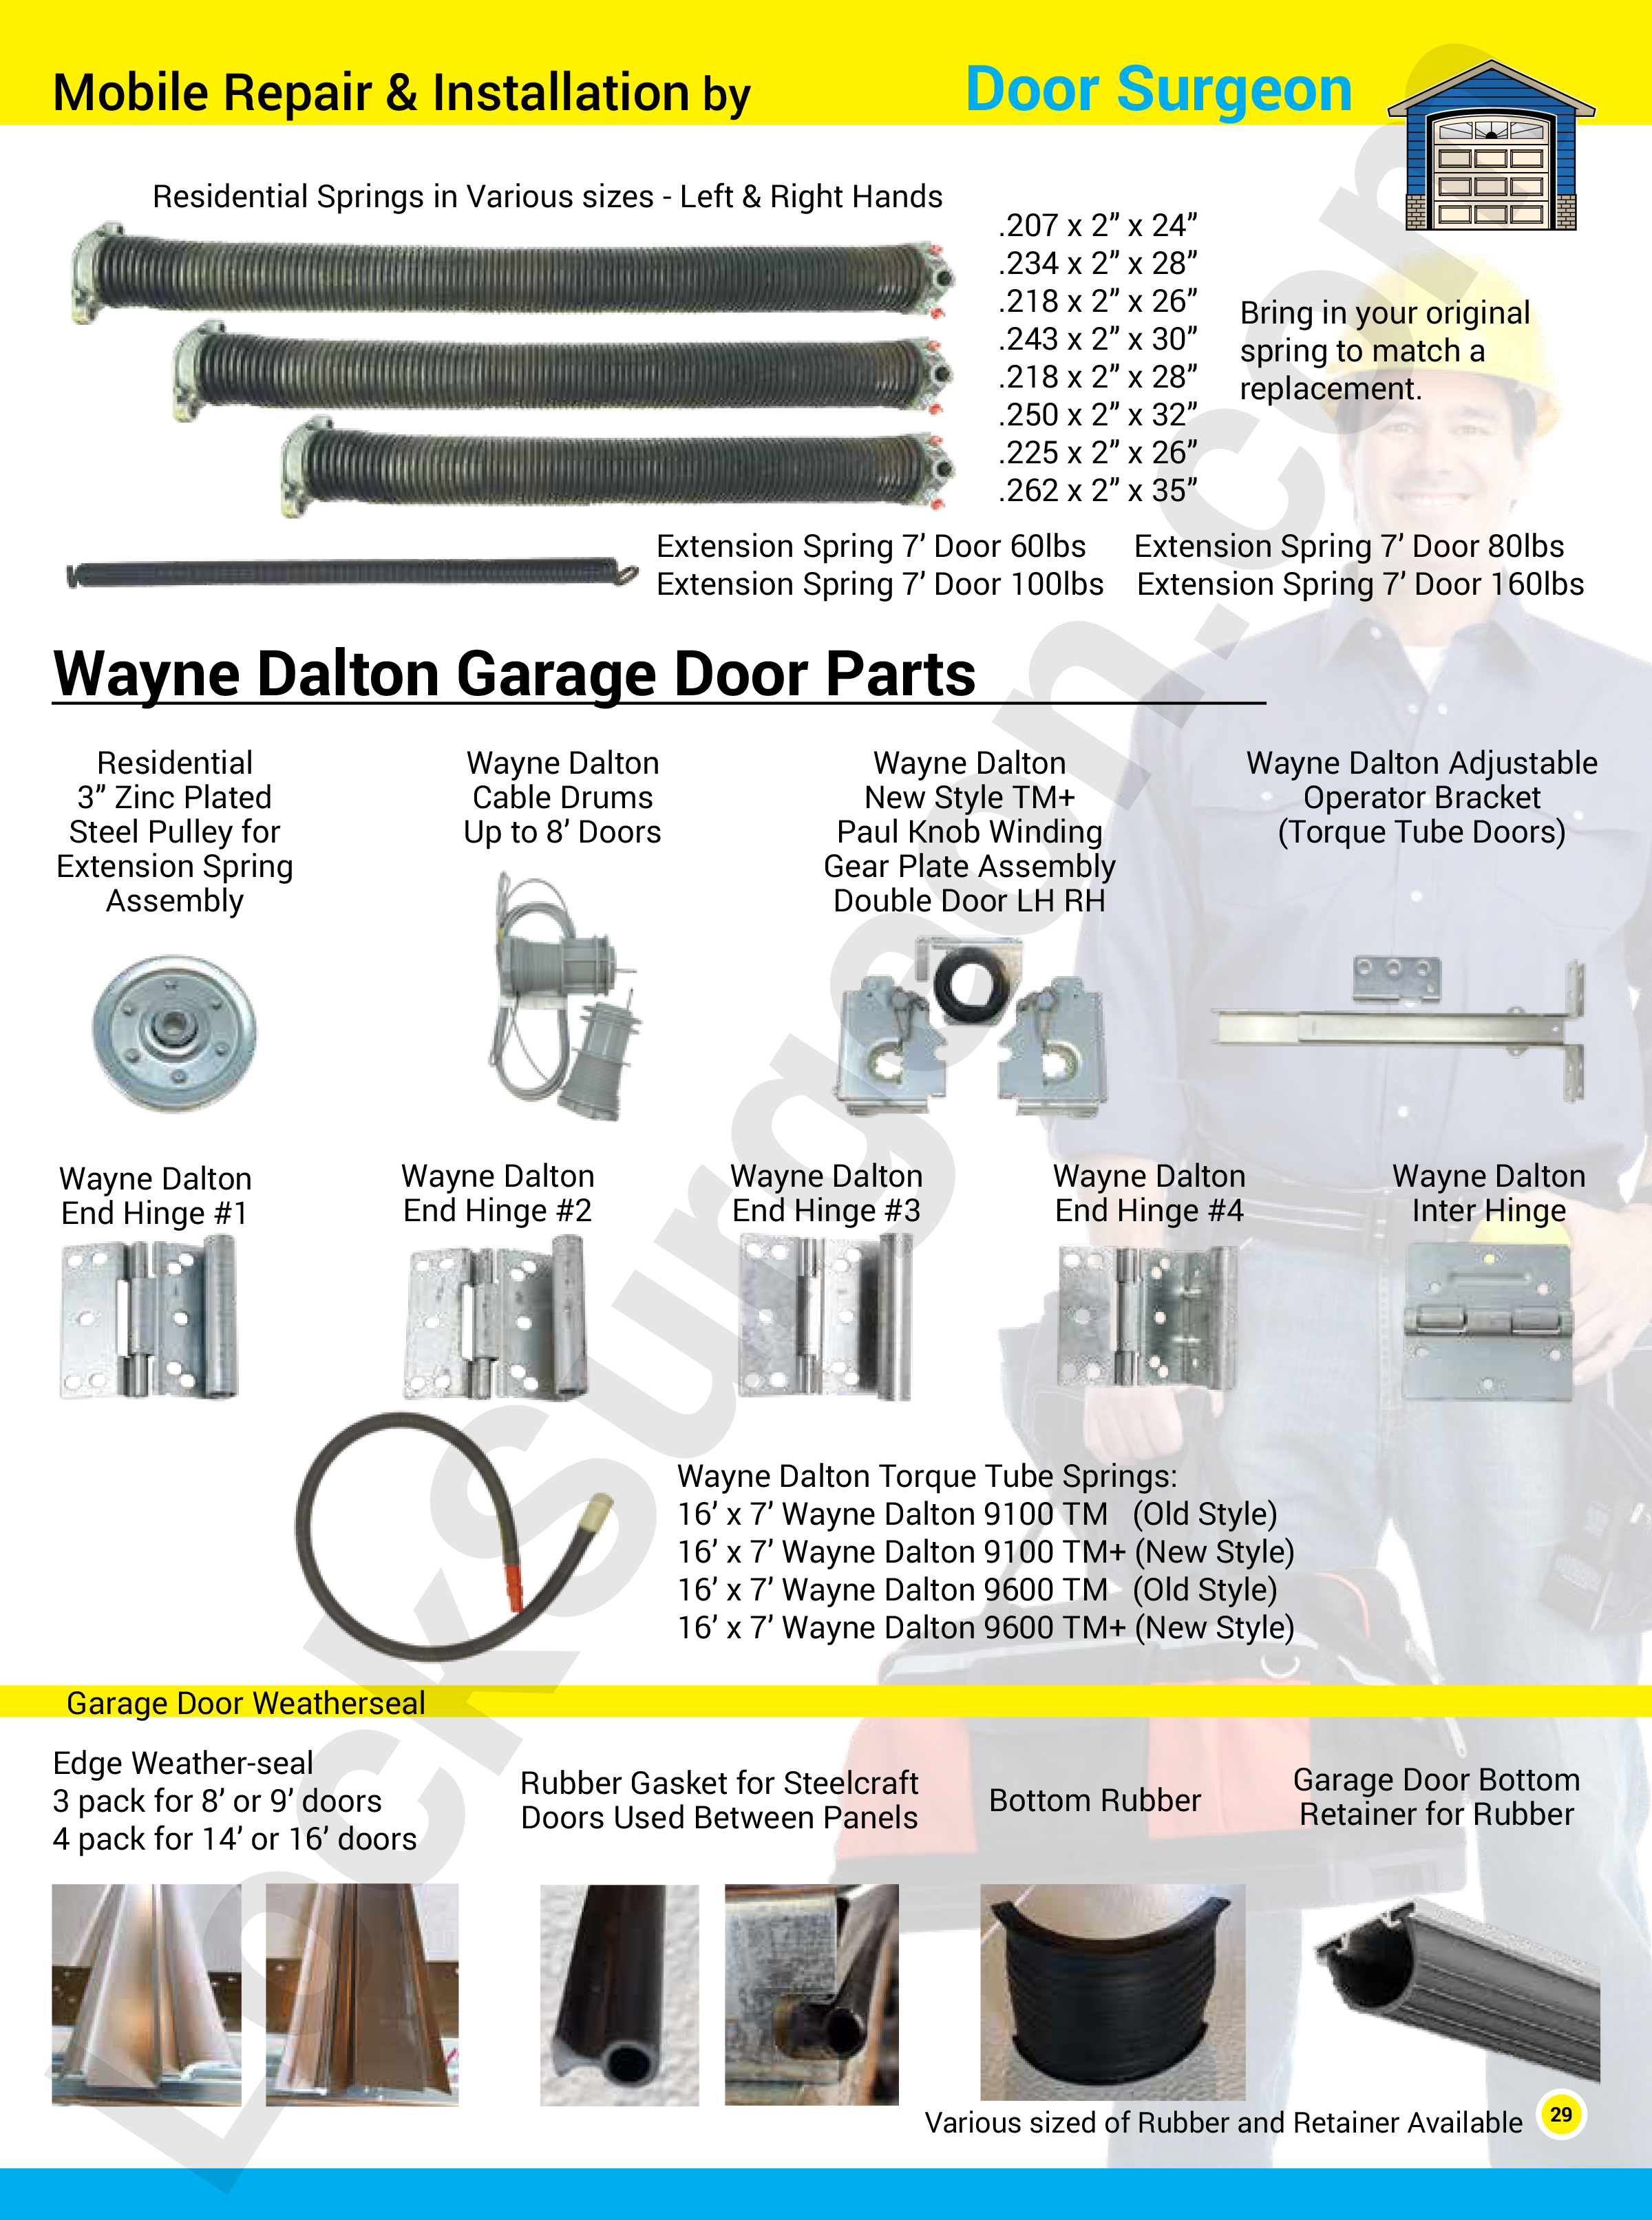 Garage door parts solutions for Edmonton South home commercial or vehicles at Lock Surgeon.